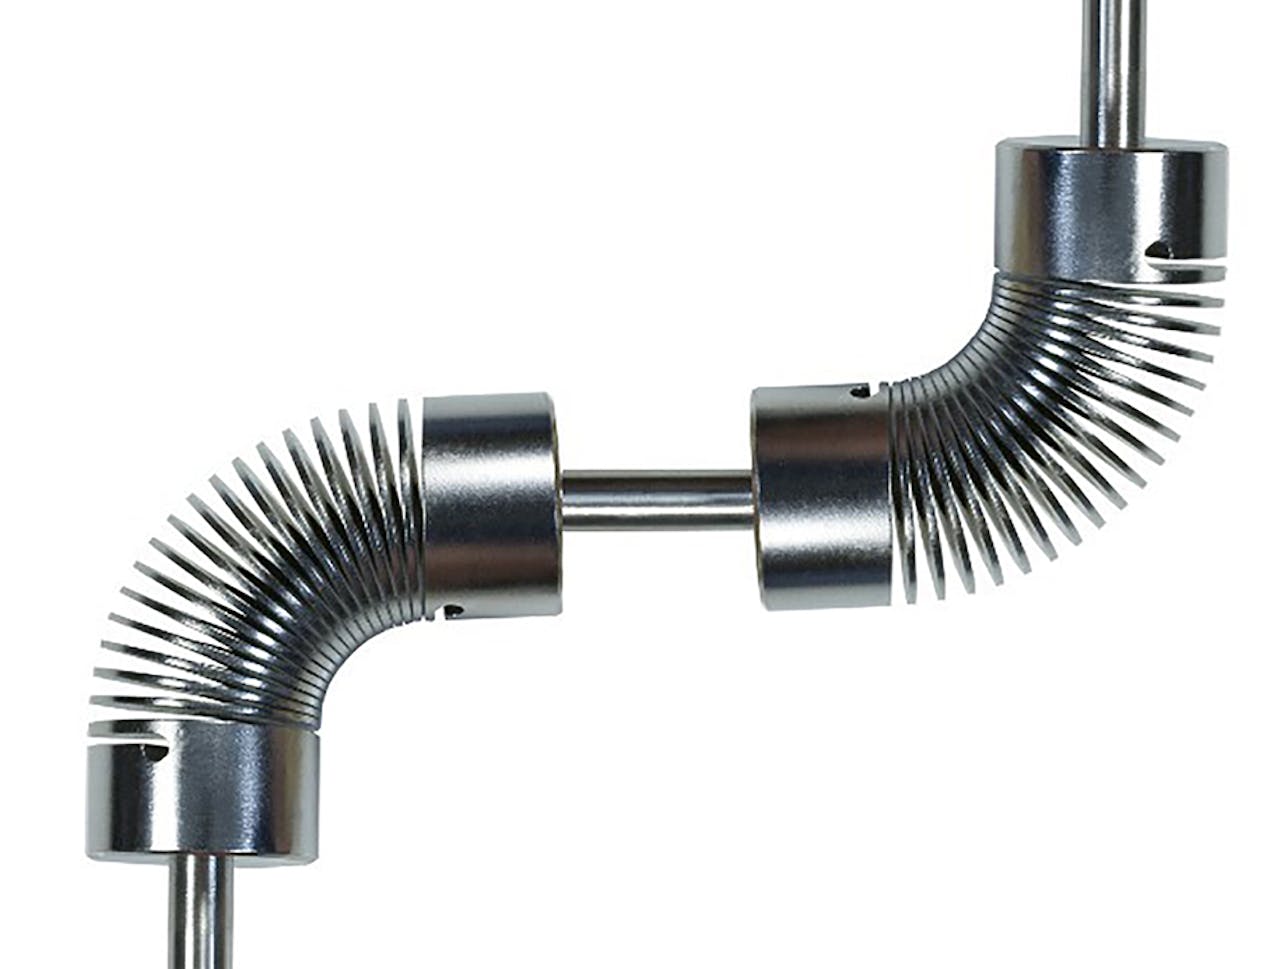 Two connecting universal joints